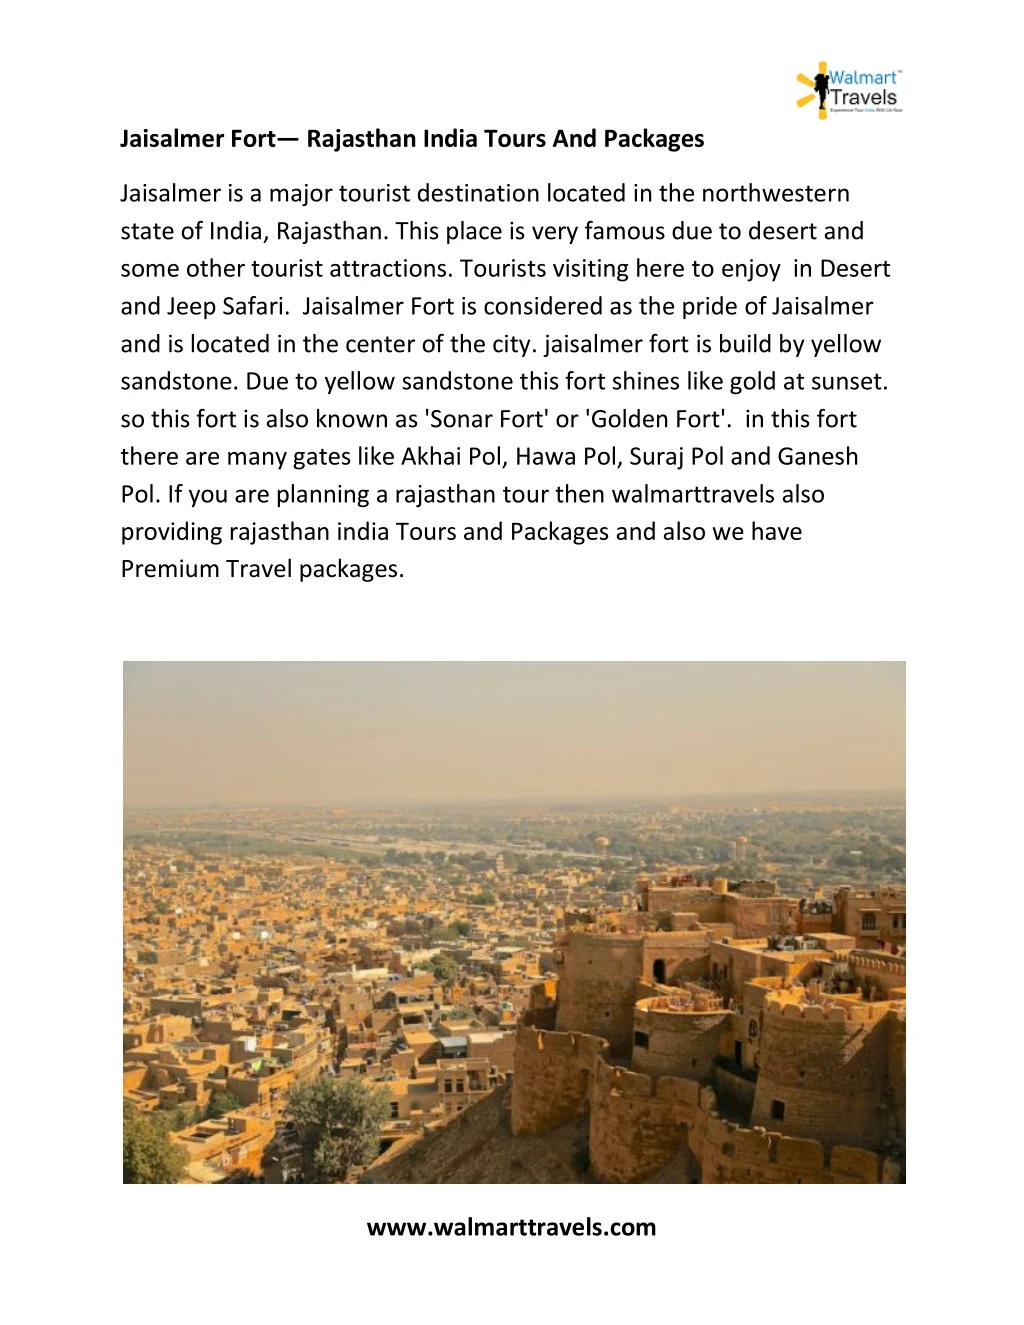 jaisalmer fort rajasthan india tours and packages